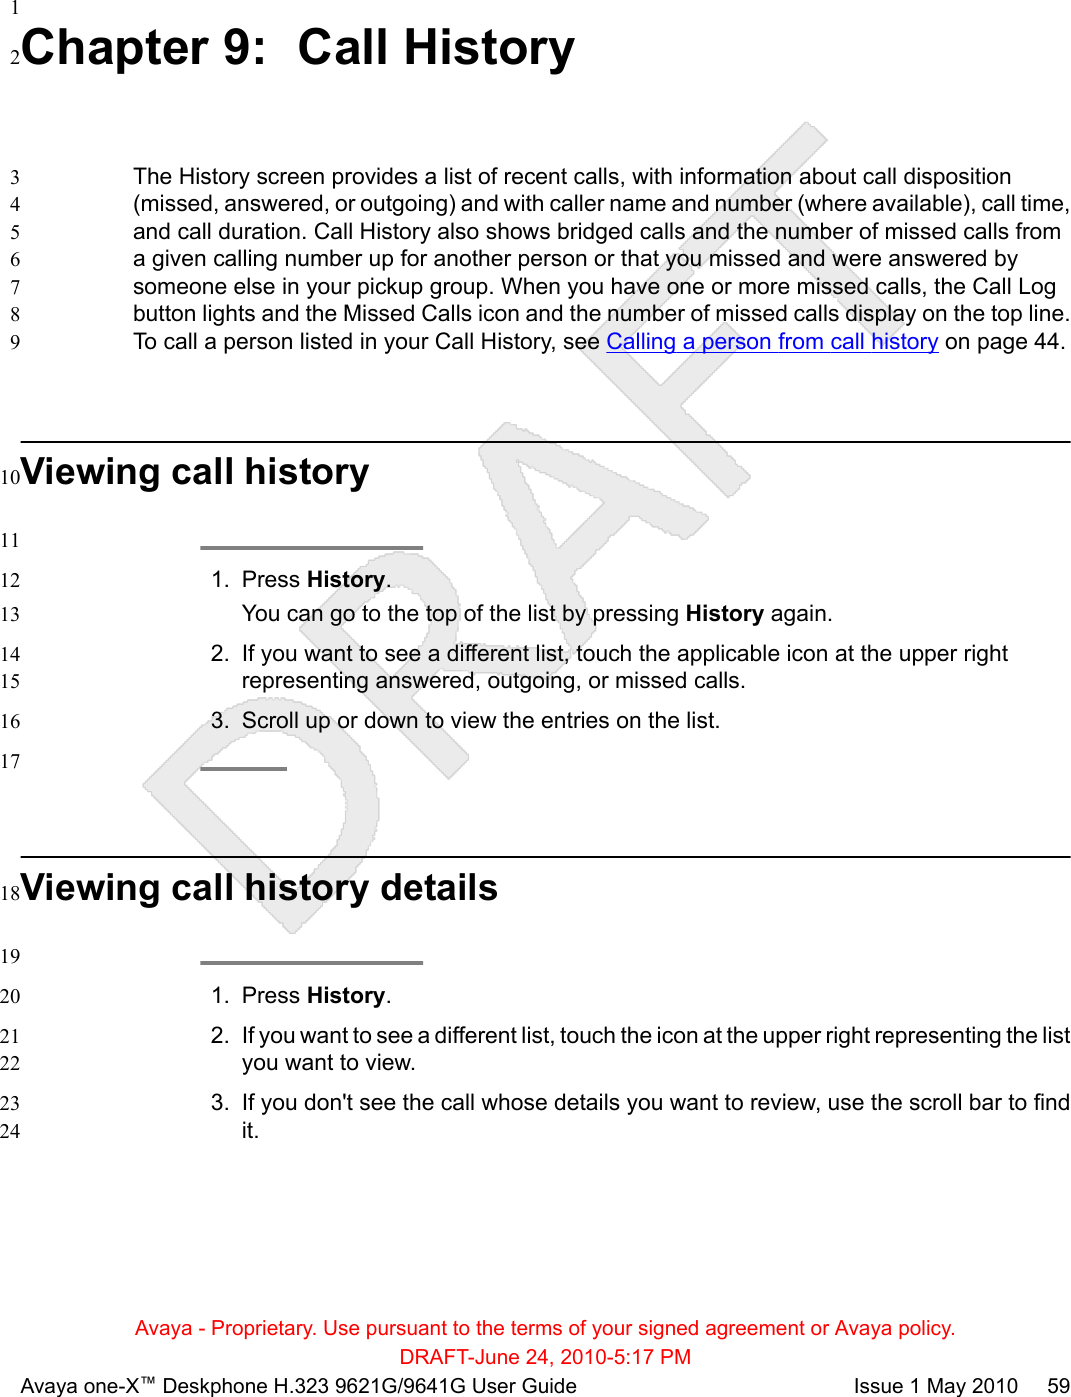 1Chapter 9:  Call History2The History screen provides a list of recent calls, with information about call disposition3(missed, answered, or outgoing) and with caller name and number (where available), call time,4and call duration. Call History also shows bridged calls and the number of missed calls from5a given calling number up for another person or that you missed and were answered by6someone else in your pickup group. When you have one or more missed calls, the Call Log7button lights and the Missed Calls icon and the number of missed calls display on the top line.8To call a person listed in your Call History, see Calling a person from call history on page 44.9Viewing call history10111. Press History.12You can go to the top of the list by pressing History again.132. If you want to see a different list, touch the applicable icon at the upper right14representing answered, outgoing, or missed calls.153. Scroll up or down to view the entries on the list.1617Viewing call history details18191. Press History.202. If you want to see a different list, touch the icon at the upper right representing the list21you want to view.223. If you don&apos;t see the call whose details you want to review, use the scroll bar to find23it.24Avaya - Proprietary. Use pursuant to the terms of your signed agreement or Avaya policy.DRAFT-June 24, 2010-5:17 PMAvaya one-X™ Deskphone H.323 9621G/9641G User Guide Issue 1 May 2010     59